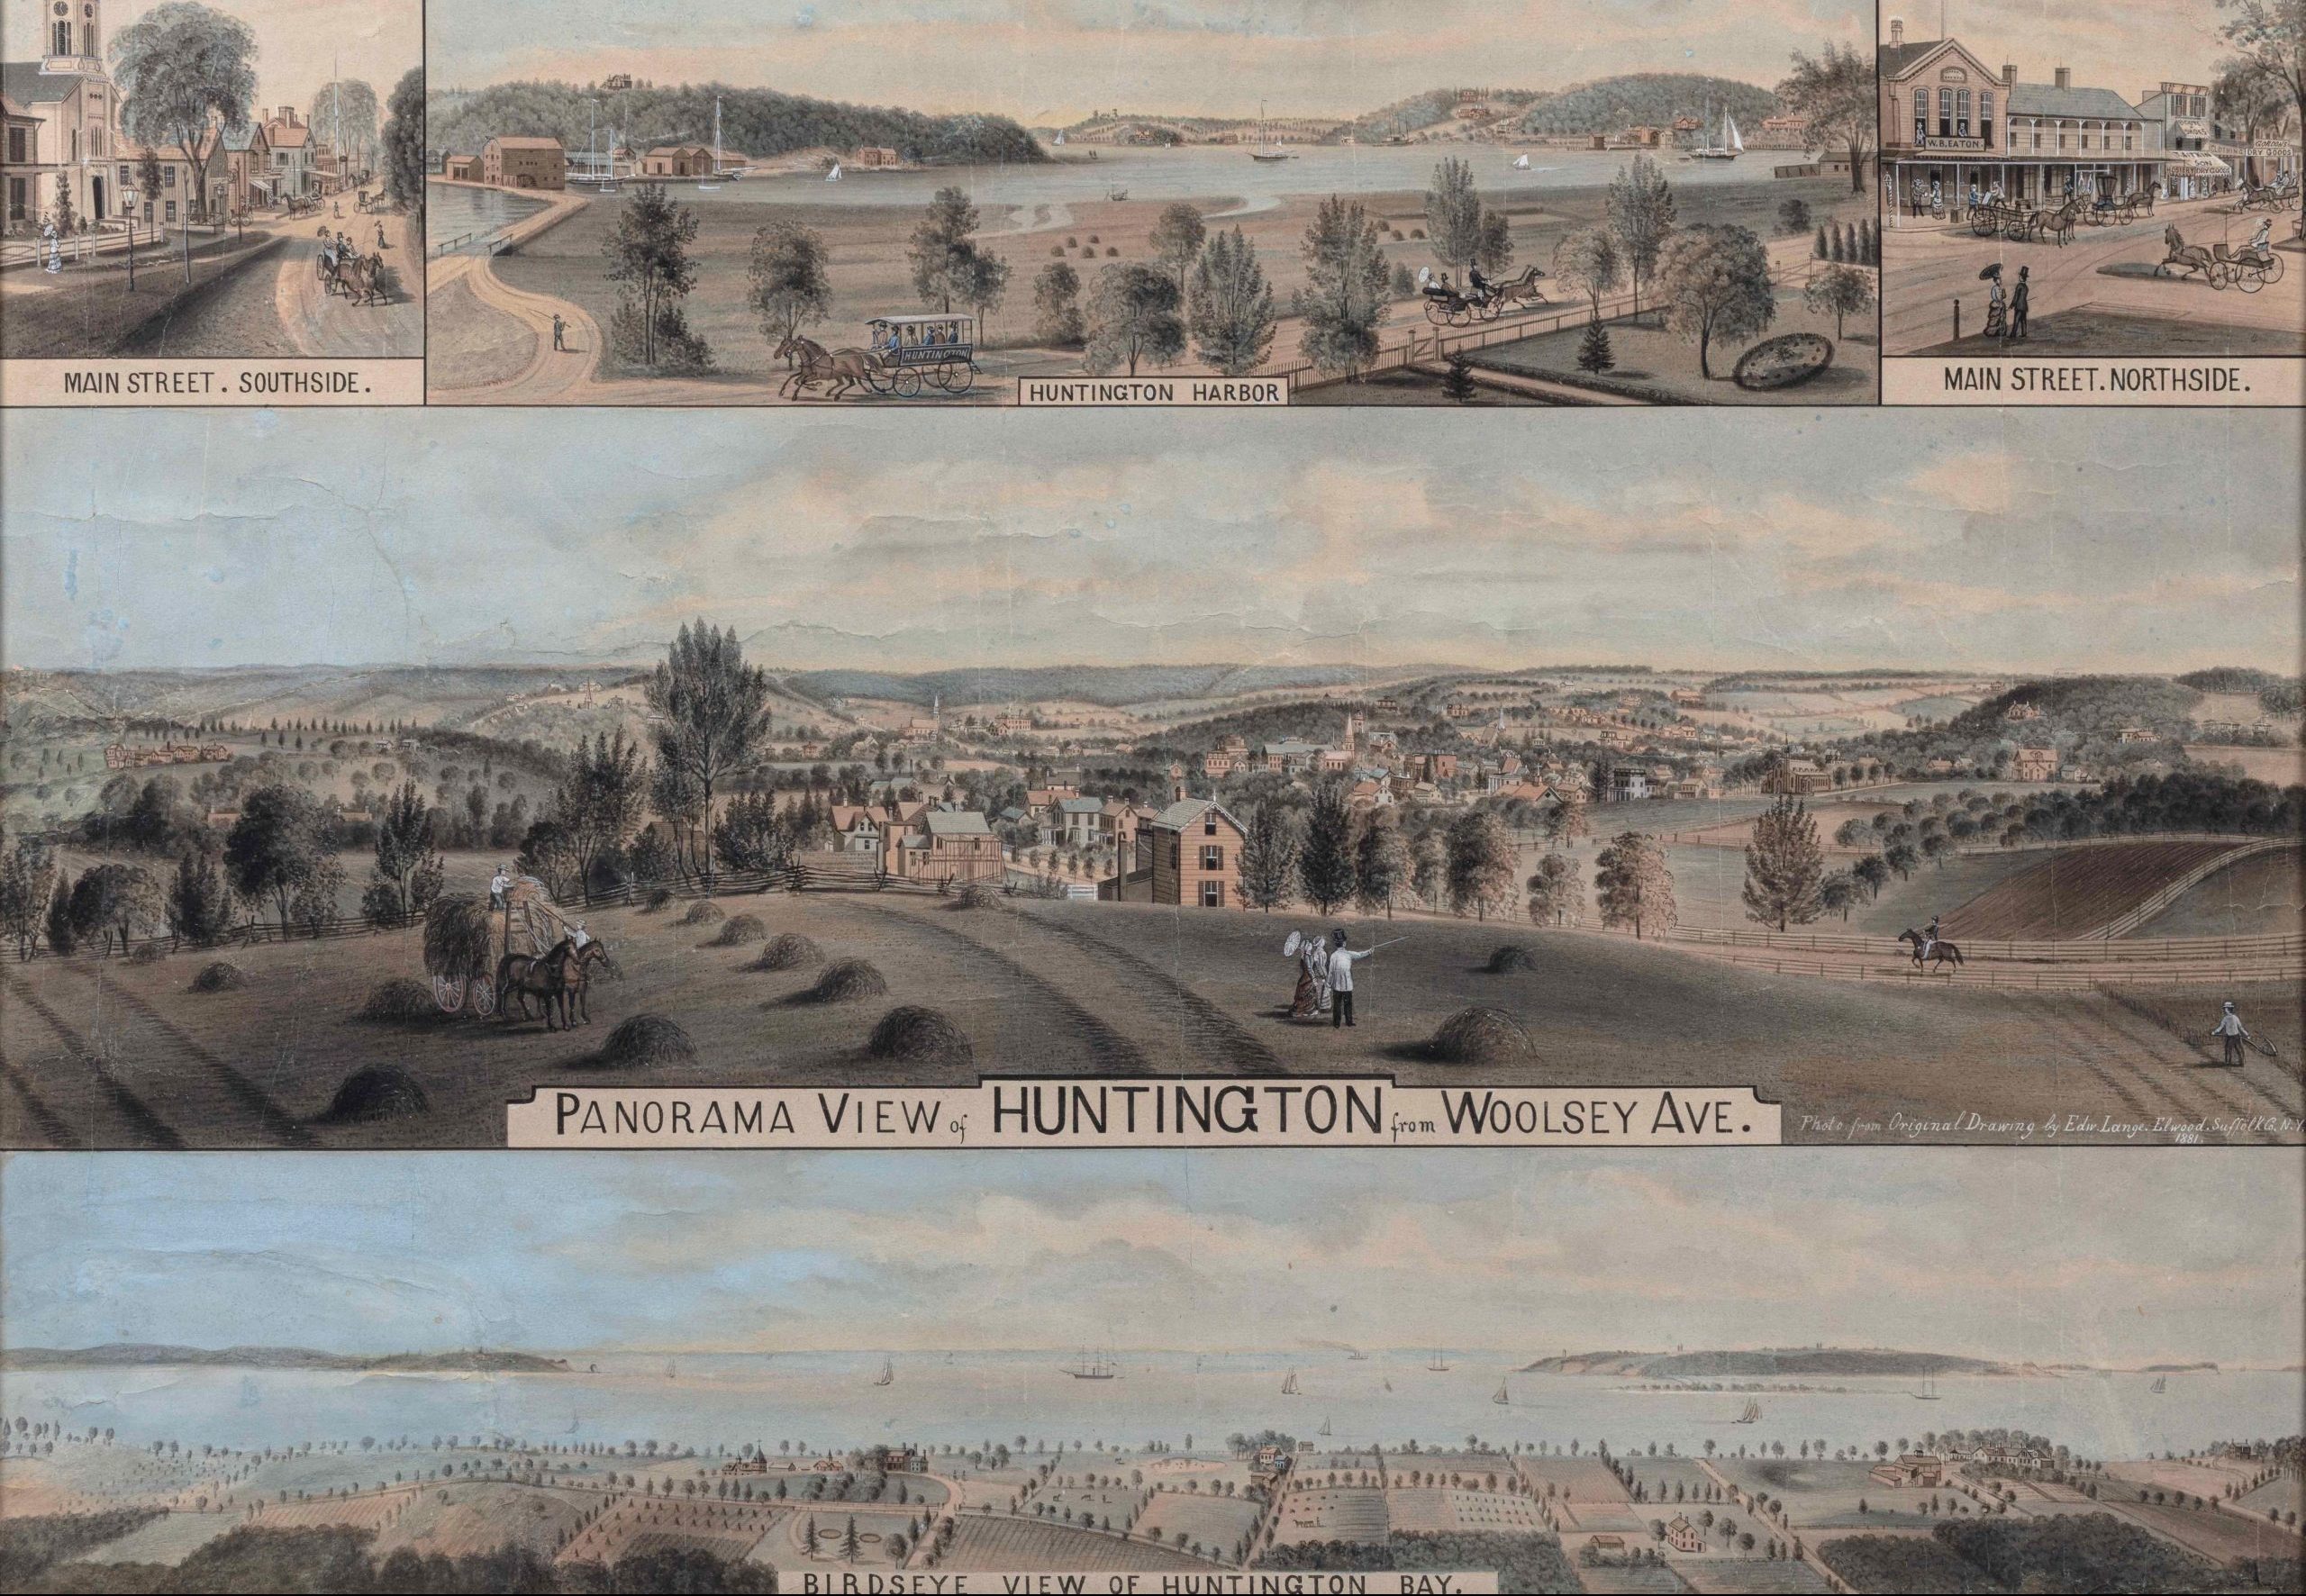 Panorama-View-of-Huntington-from-Woolsey-Avenue-Huntington-Historical-Society-1990.14_cropped-scaled-e1649344632932.jpg